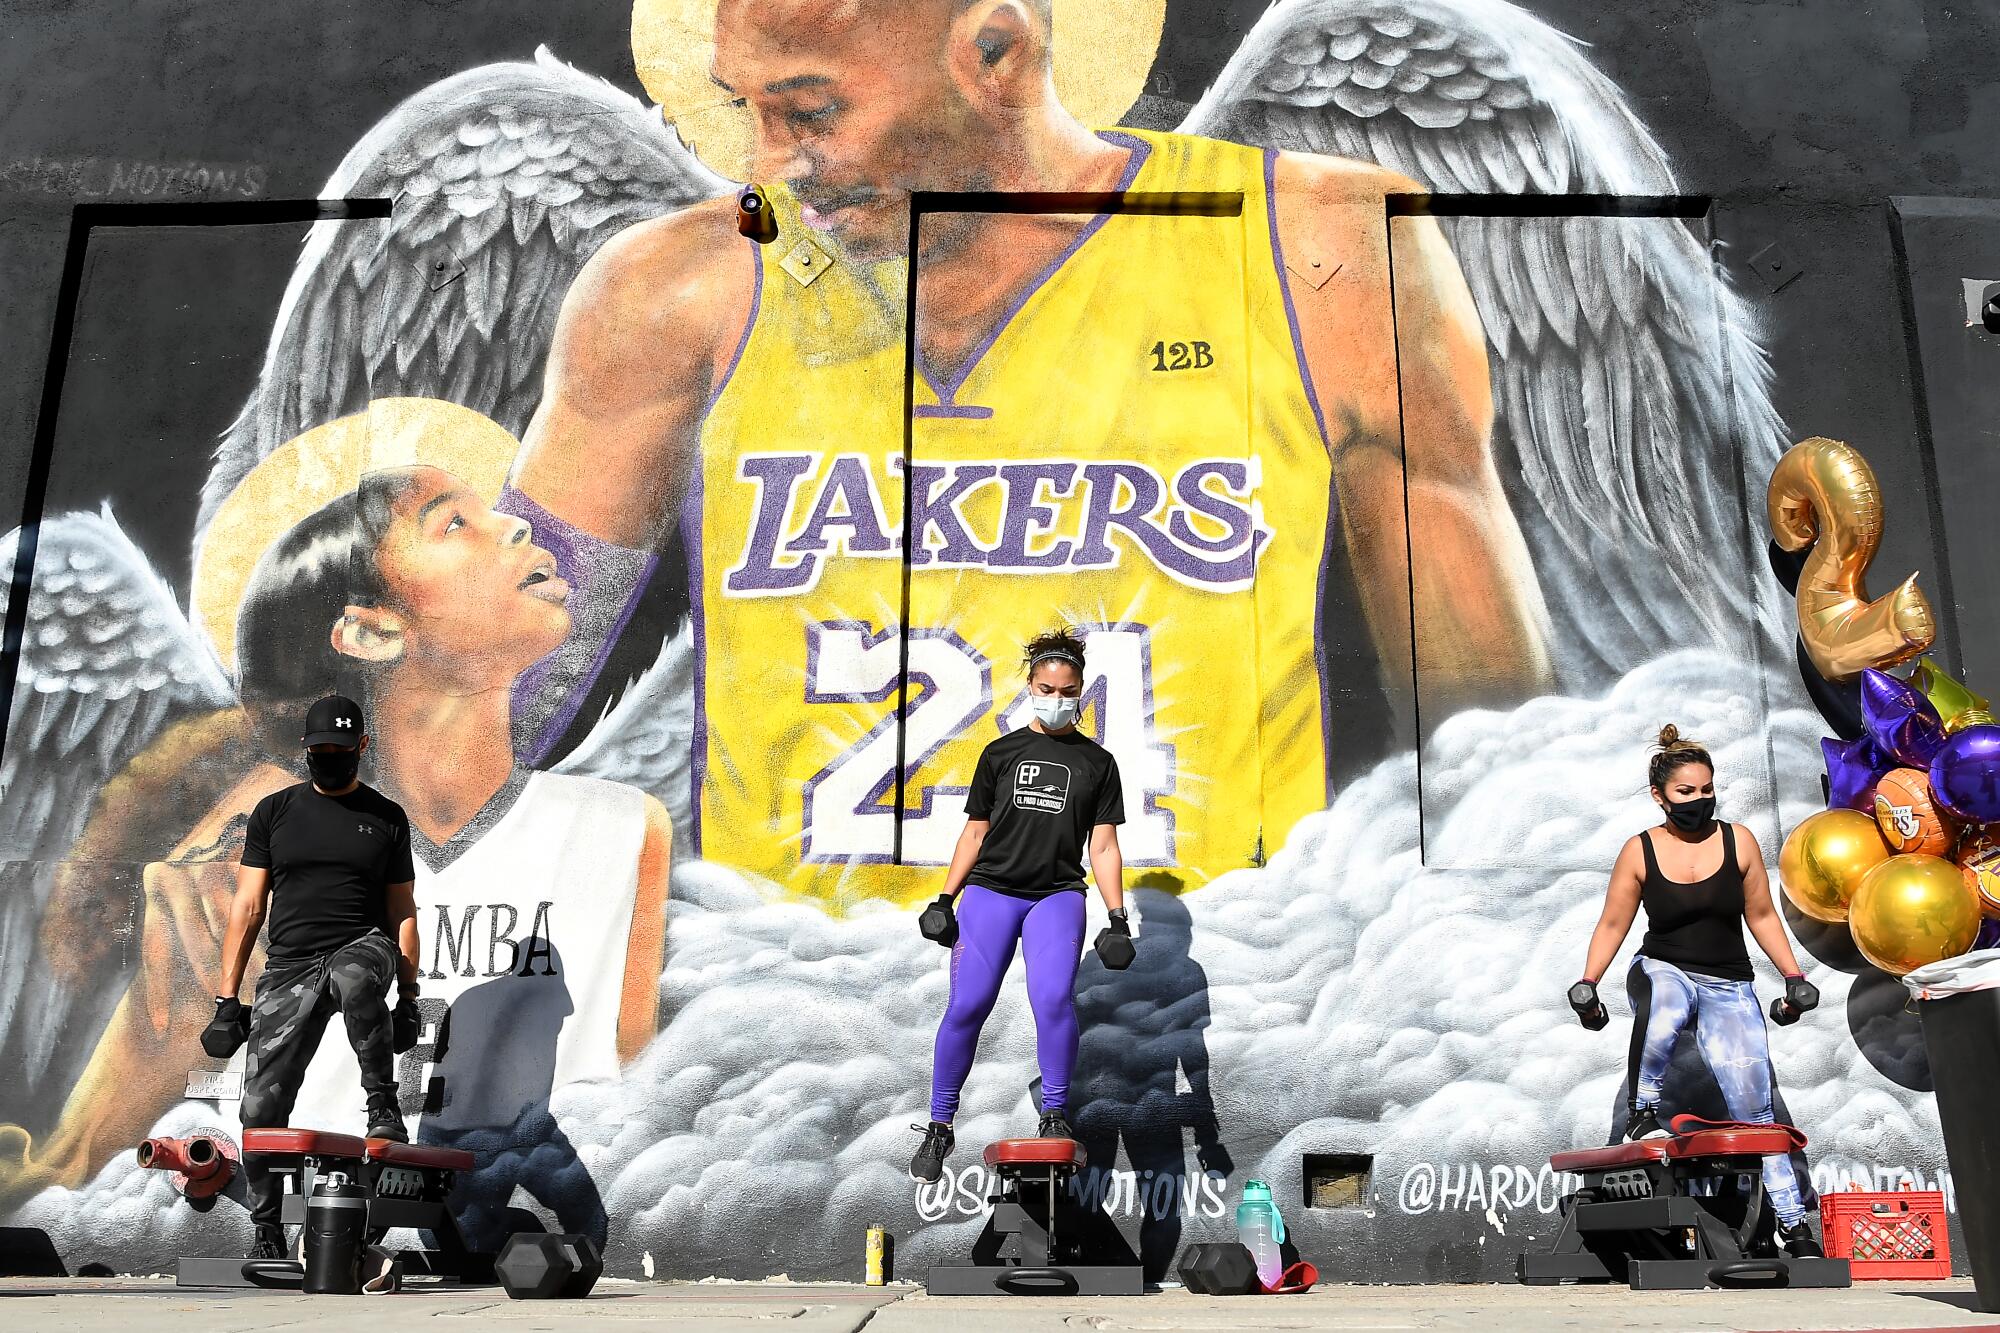 Three people hold dumbbells in front of a mural depicting Kobe and Gianna Bryant with angel wings.